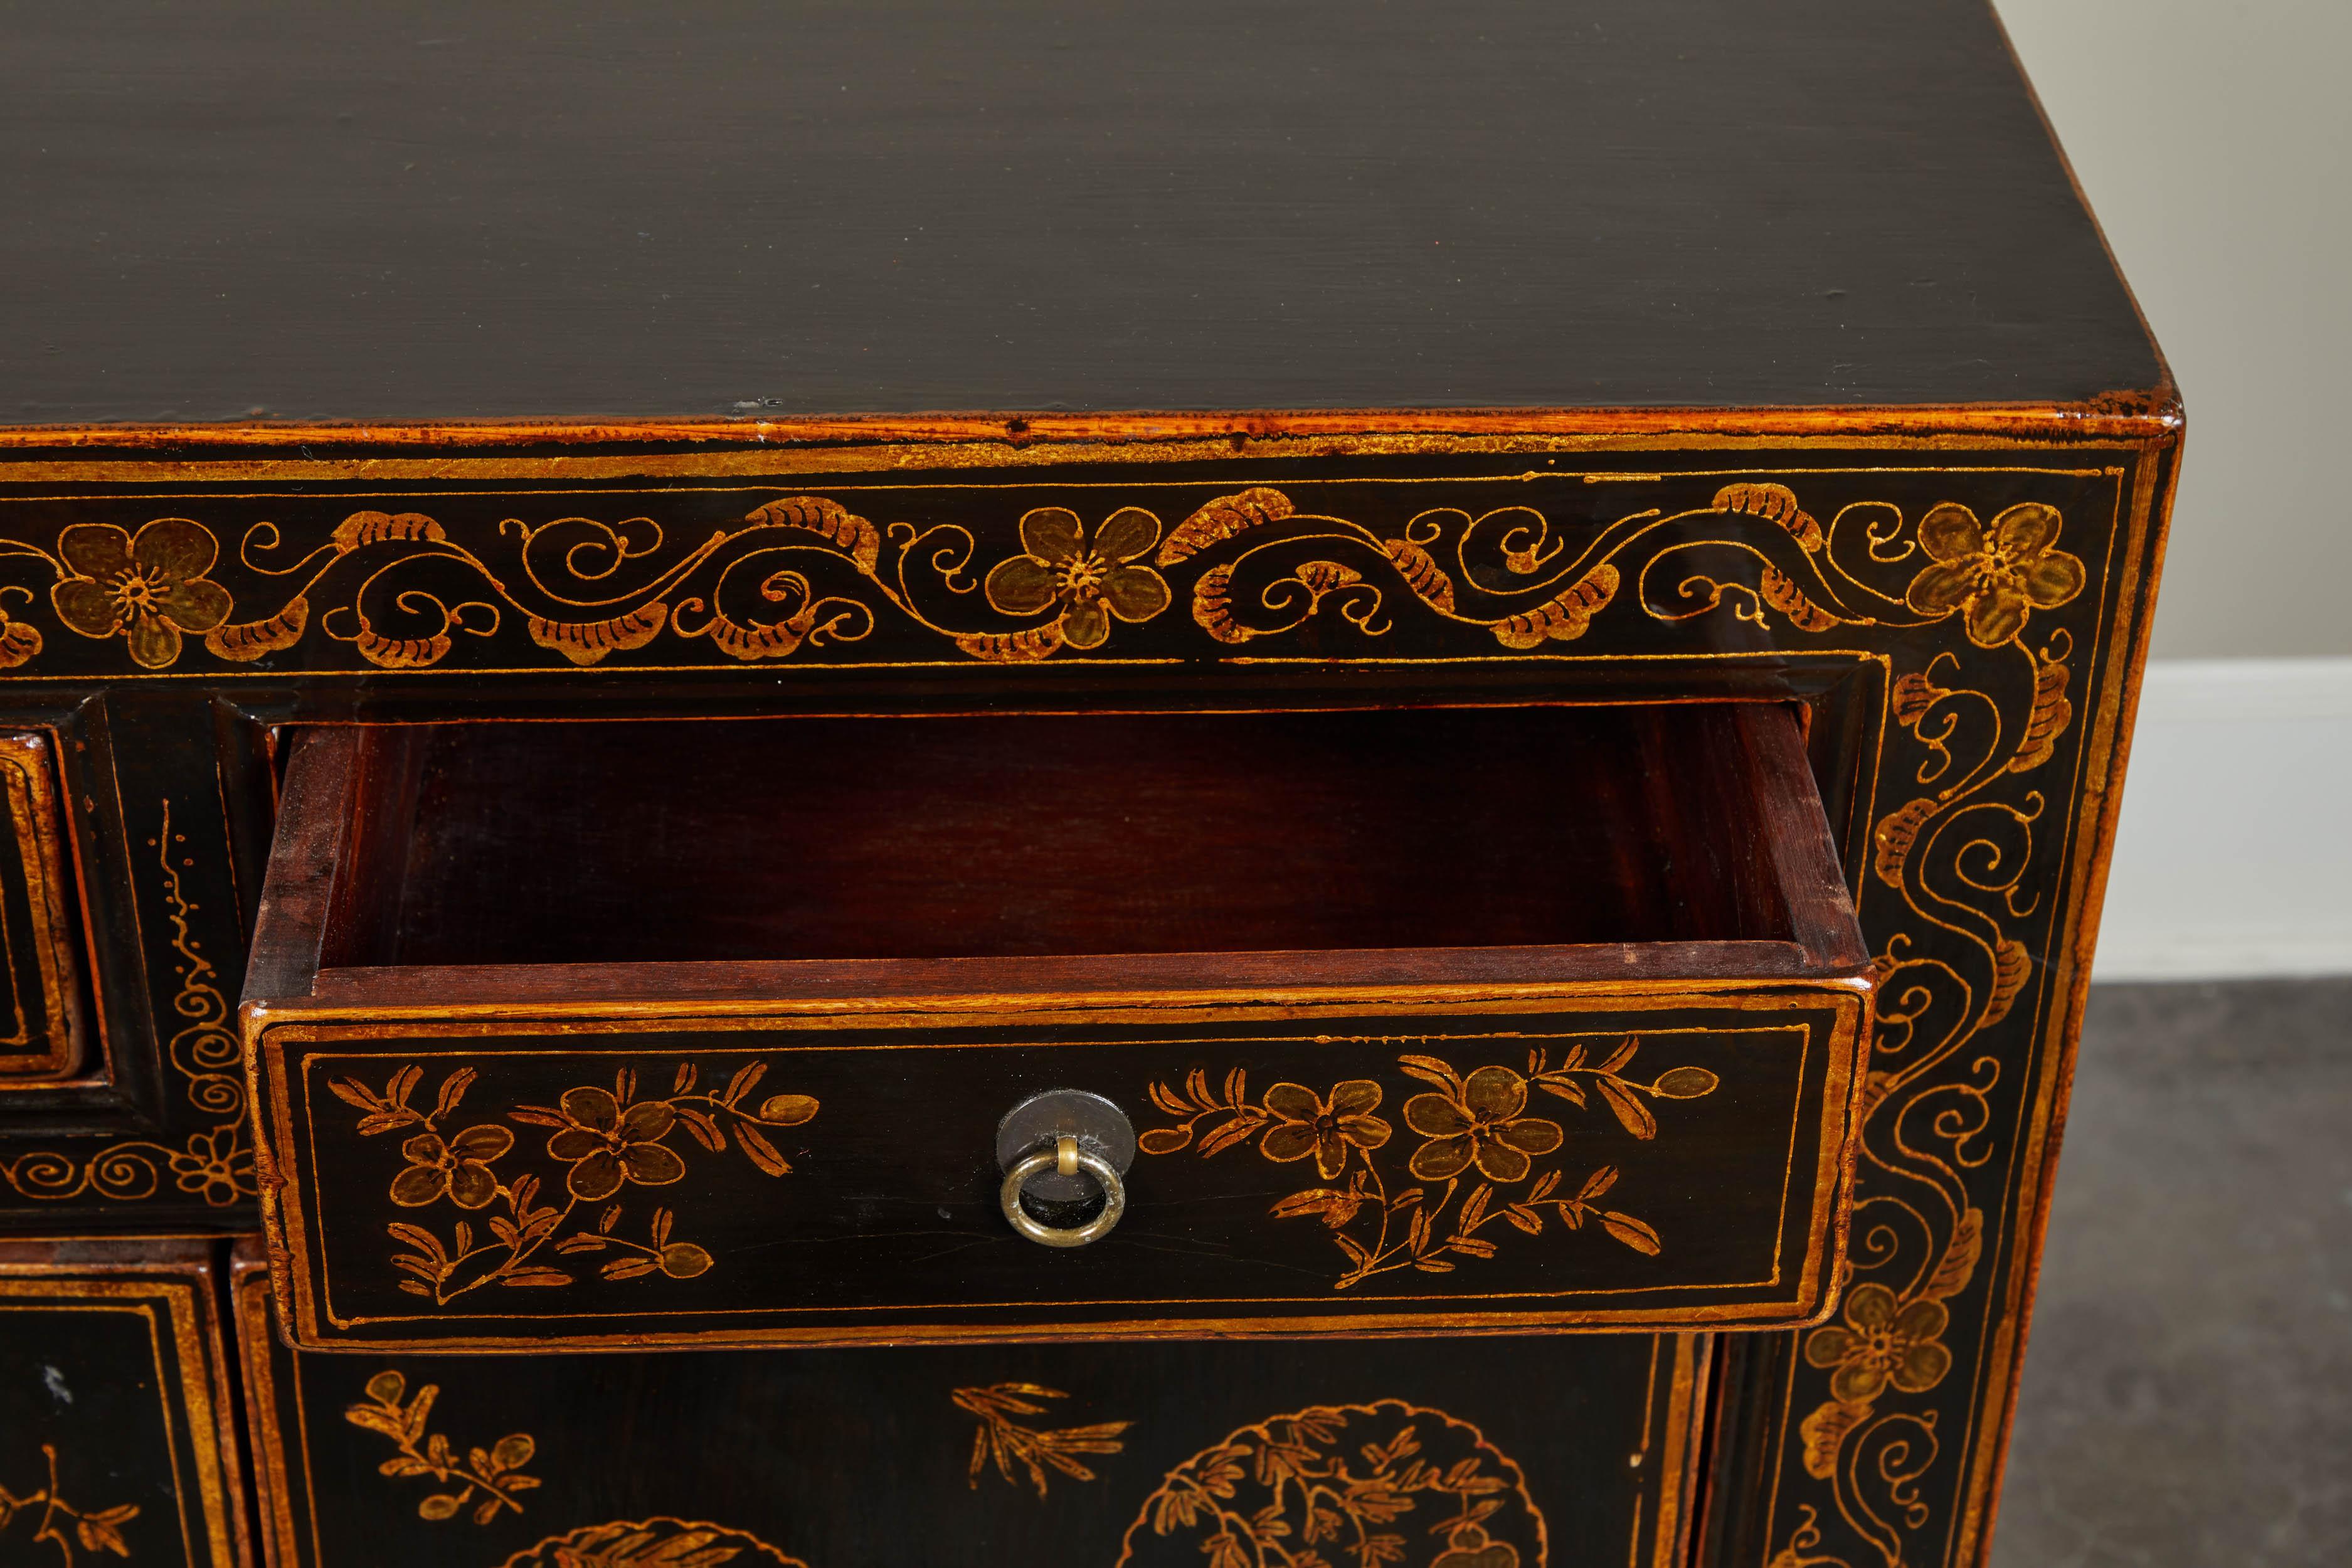 Pair of black lacquer side cabinets featuring gold painted chinoiserie details throughout. Pair of simple hinge doors and single drawer on top, circa 20th century.